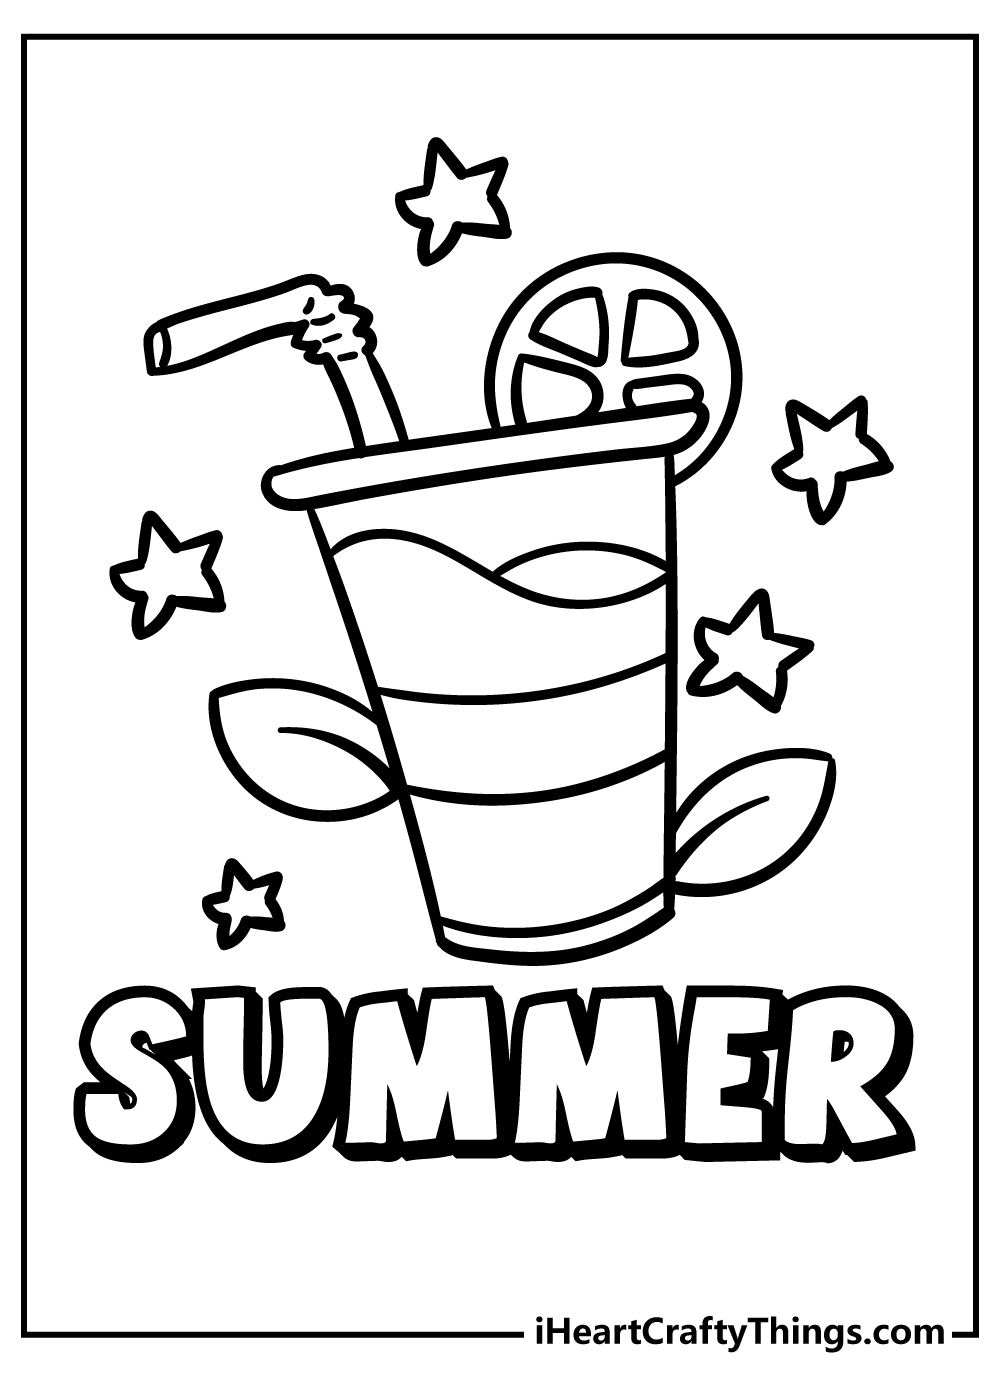 Summer Coloring Book for kids free printable